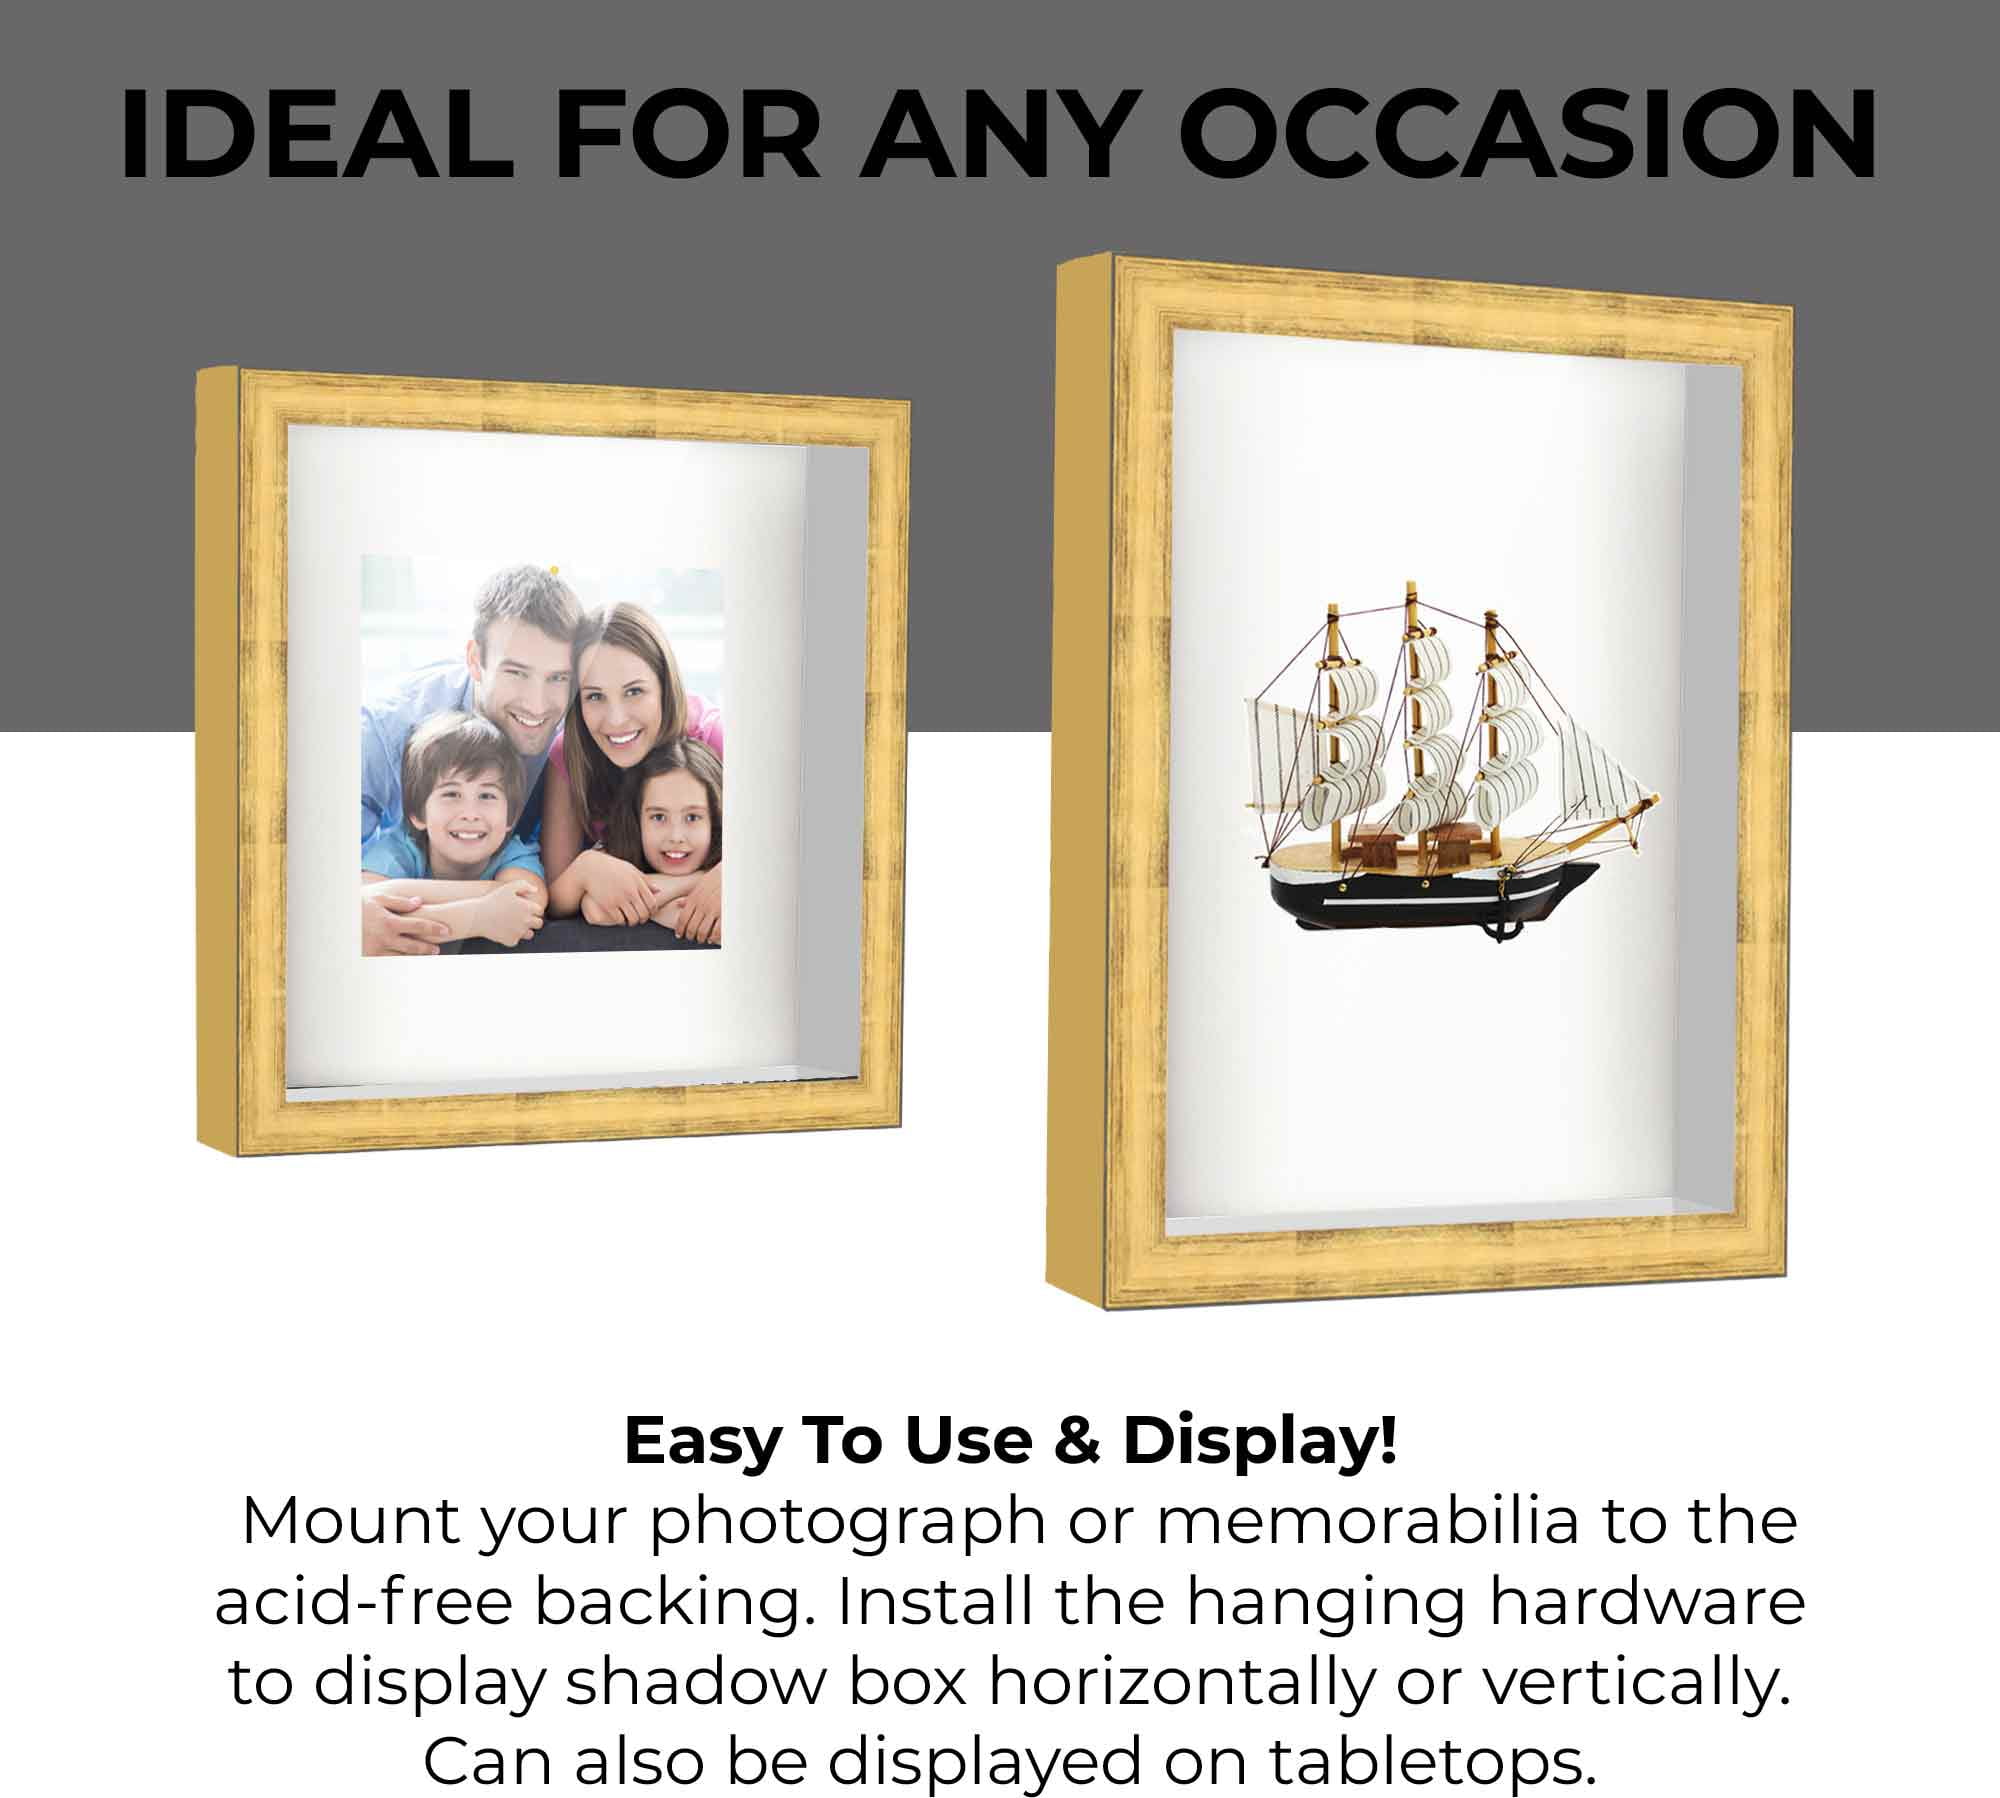 Honey Pecan 8x8 Wood Shadow Box with Gold Acid-Free Backing - With 5/8  Usable Depth - With UV Acrylic & Hanging Hardware - Bed Bath & Beyond -  38022514